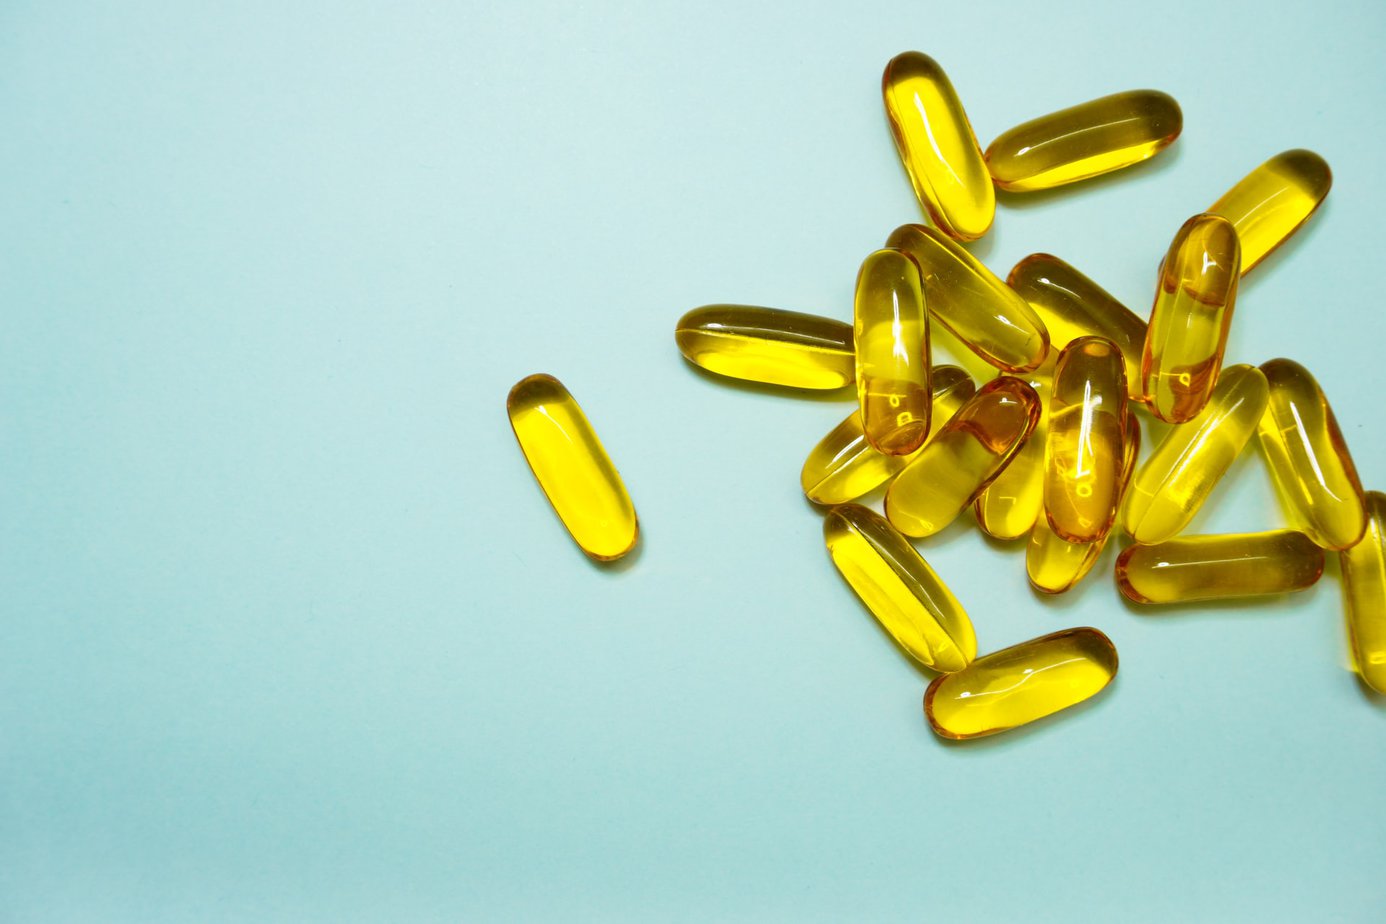 Liquid supplements and nutrients – are they really better absorbed than tablets or capsules?